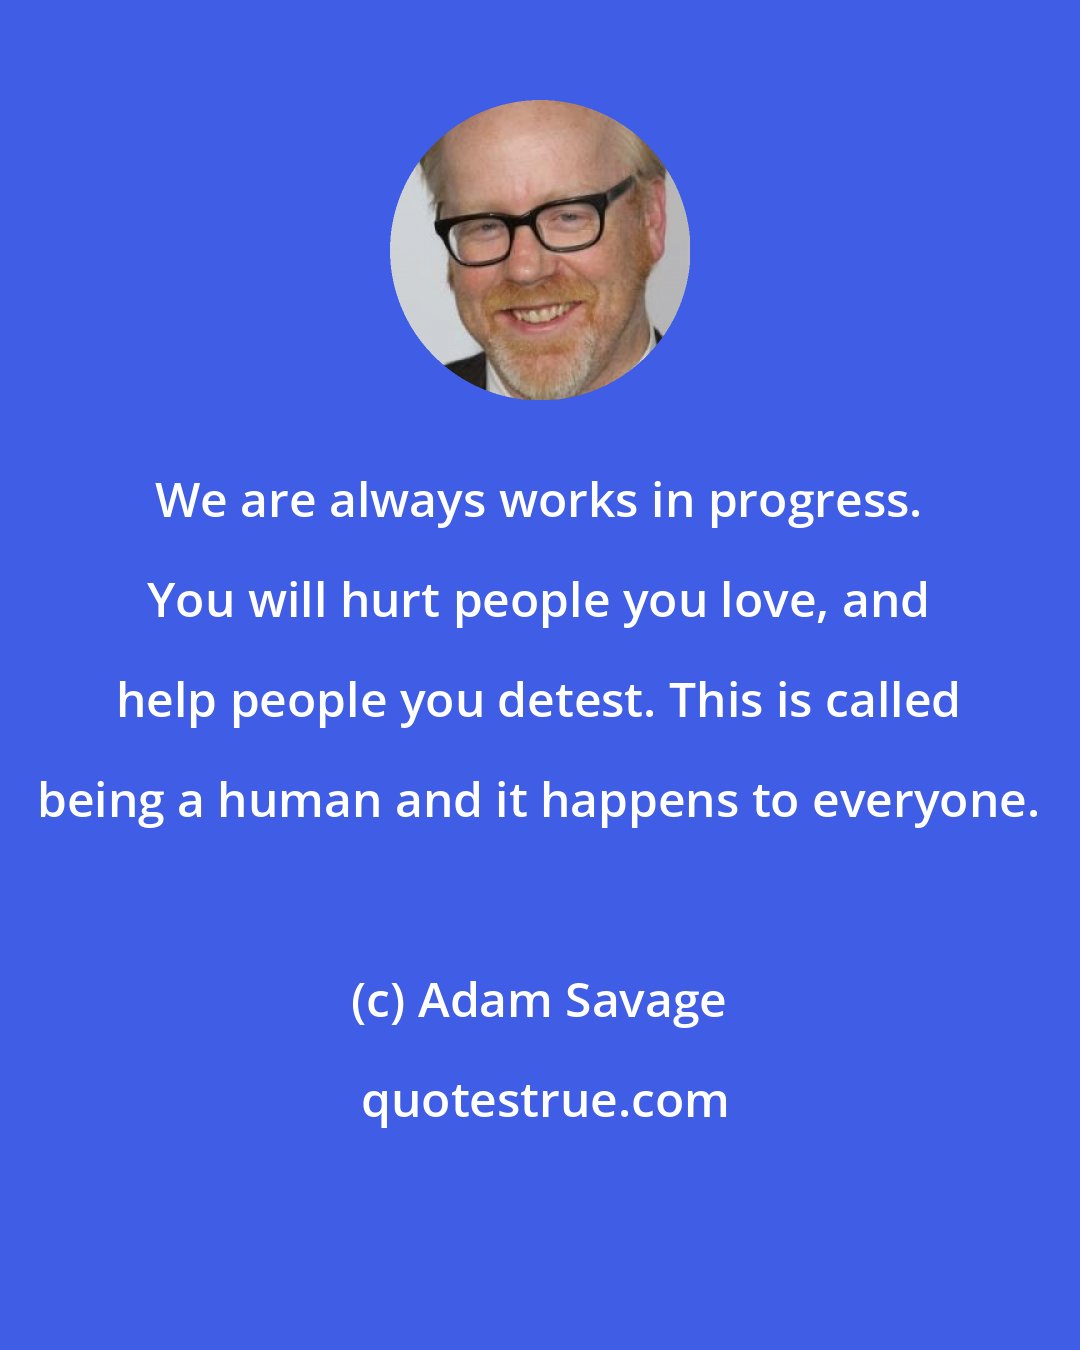 Adam Savage: We are always works in progress. You will hurt people you love, and help people you detest. This is called being a human and it happens to everyone.